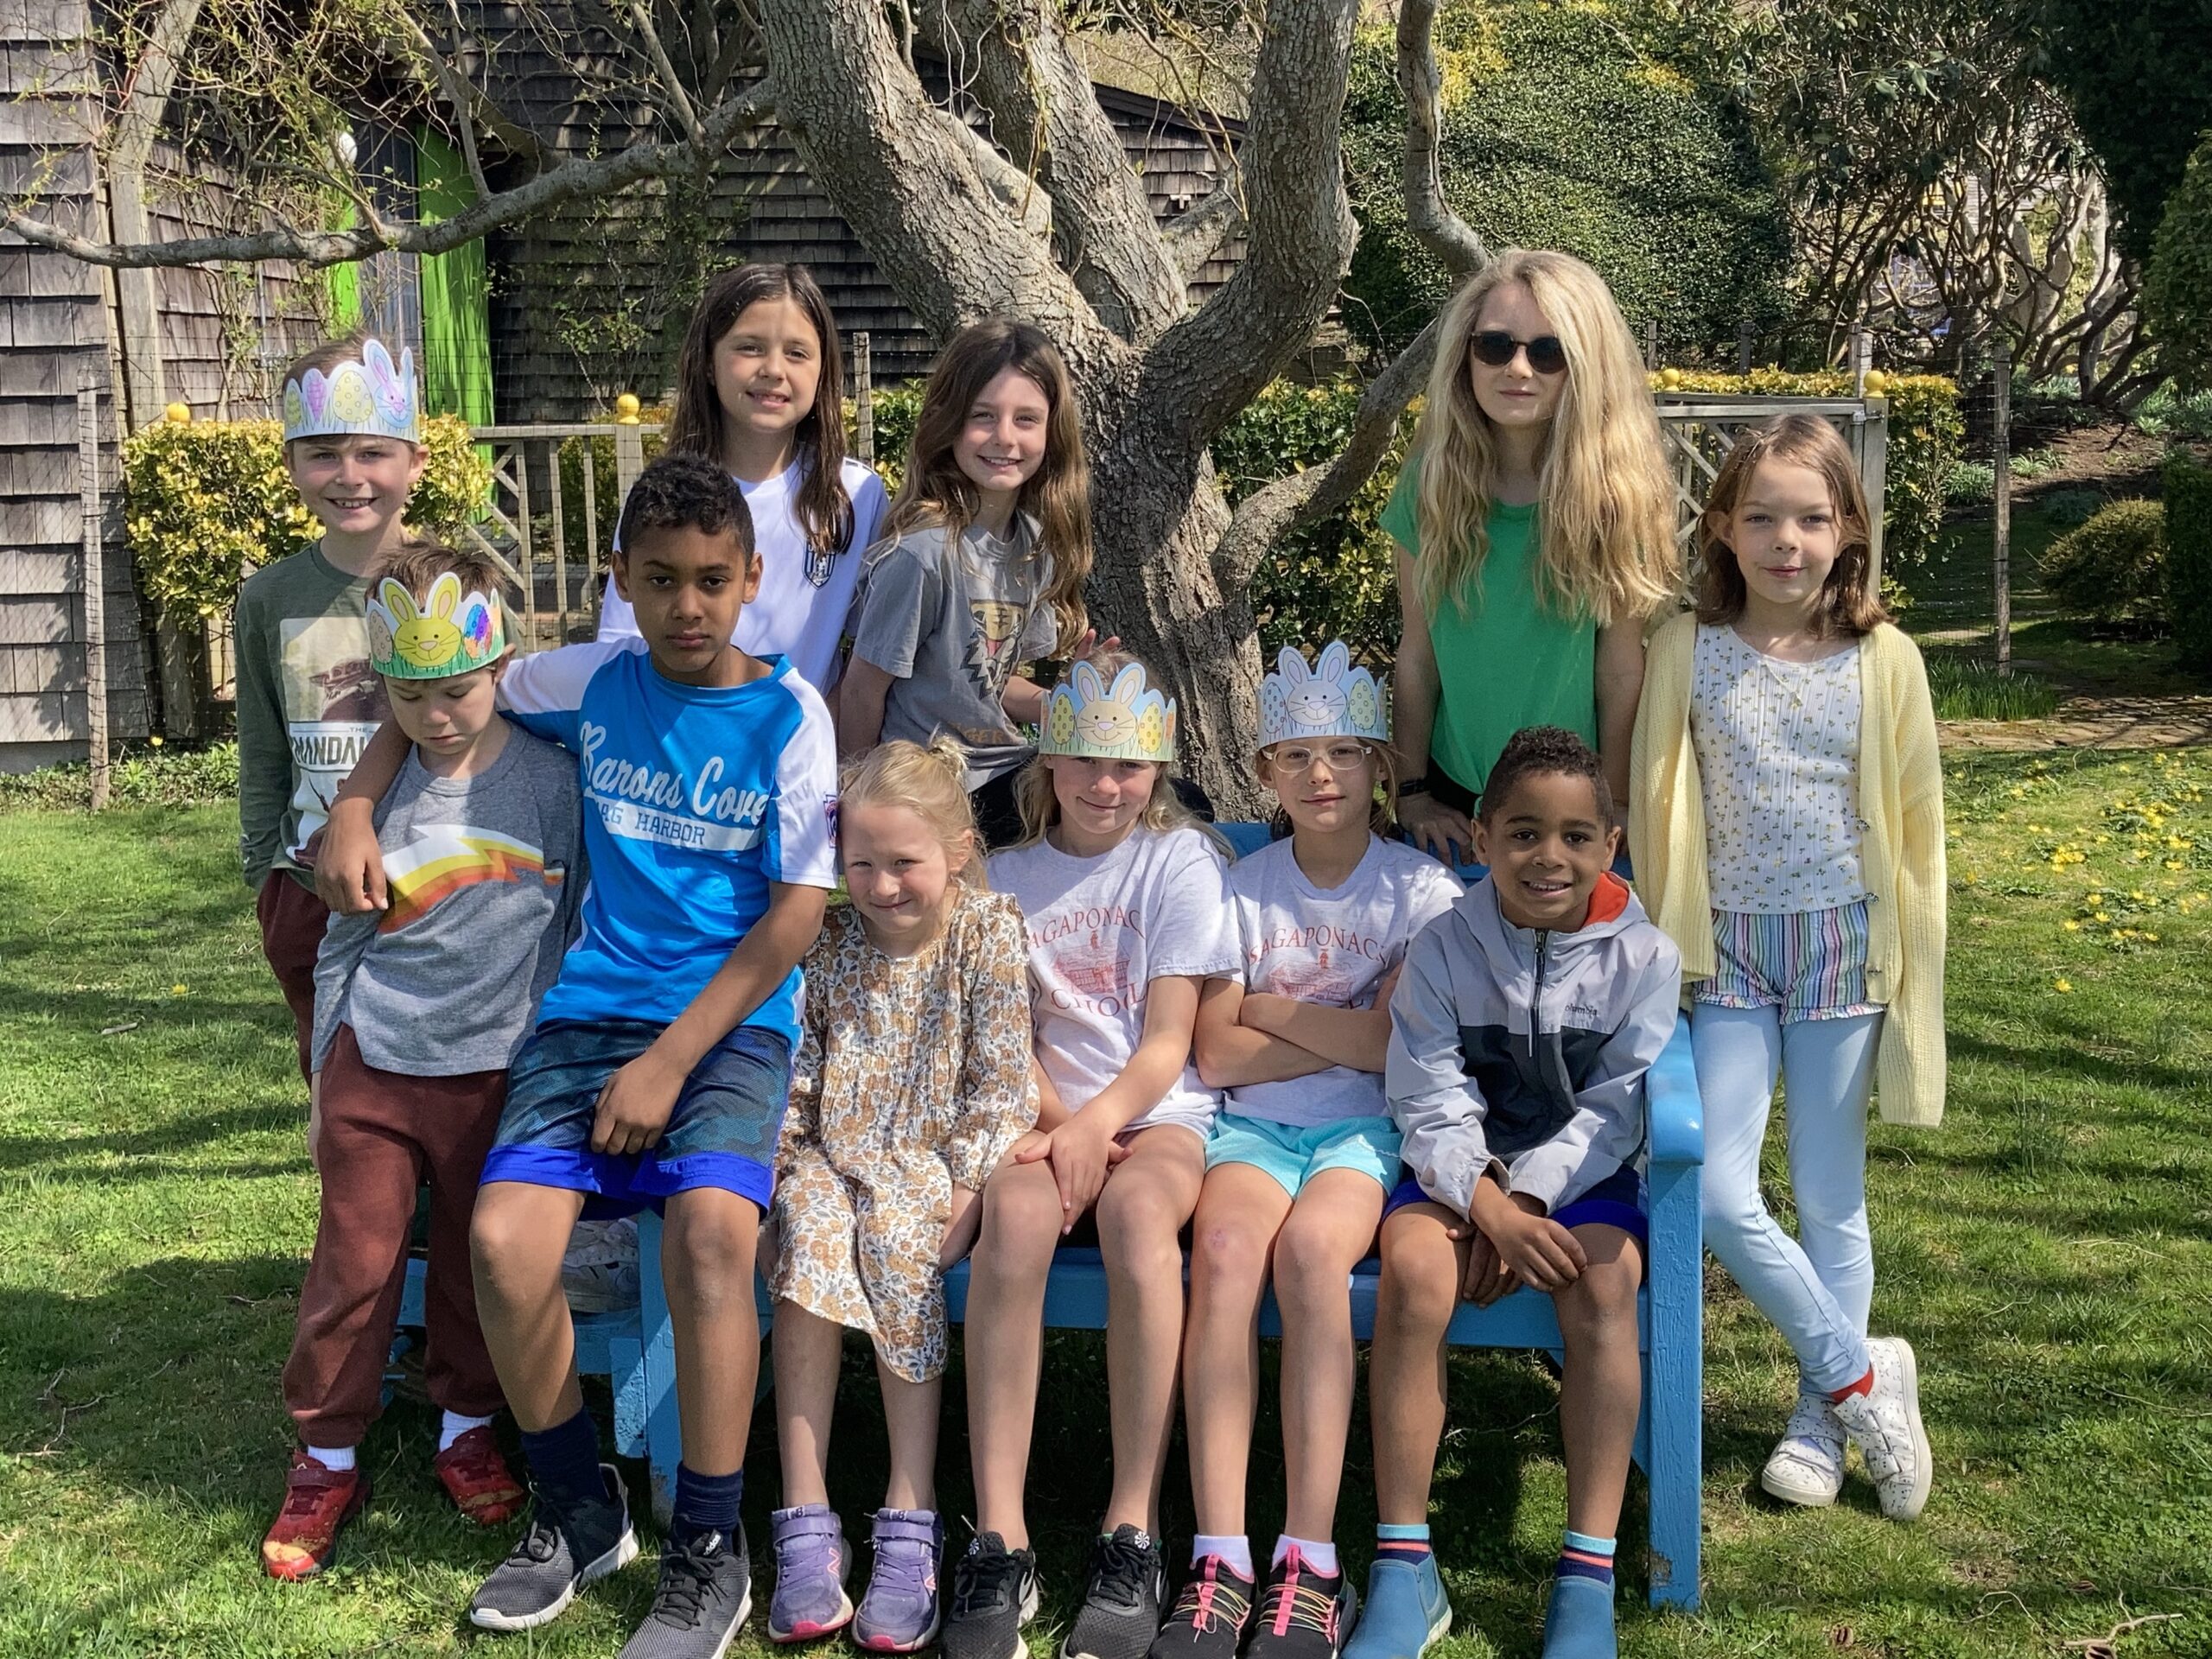 Sagaponack School students visited Madoo Conservancy on Thursday to plant seeds in preparation for transplanting into the school's garden. COURTESY SAGAPONACK SCHOOL DISTRICT